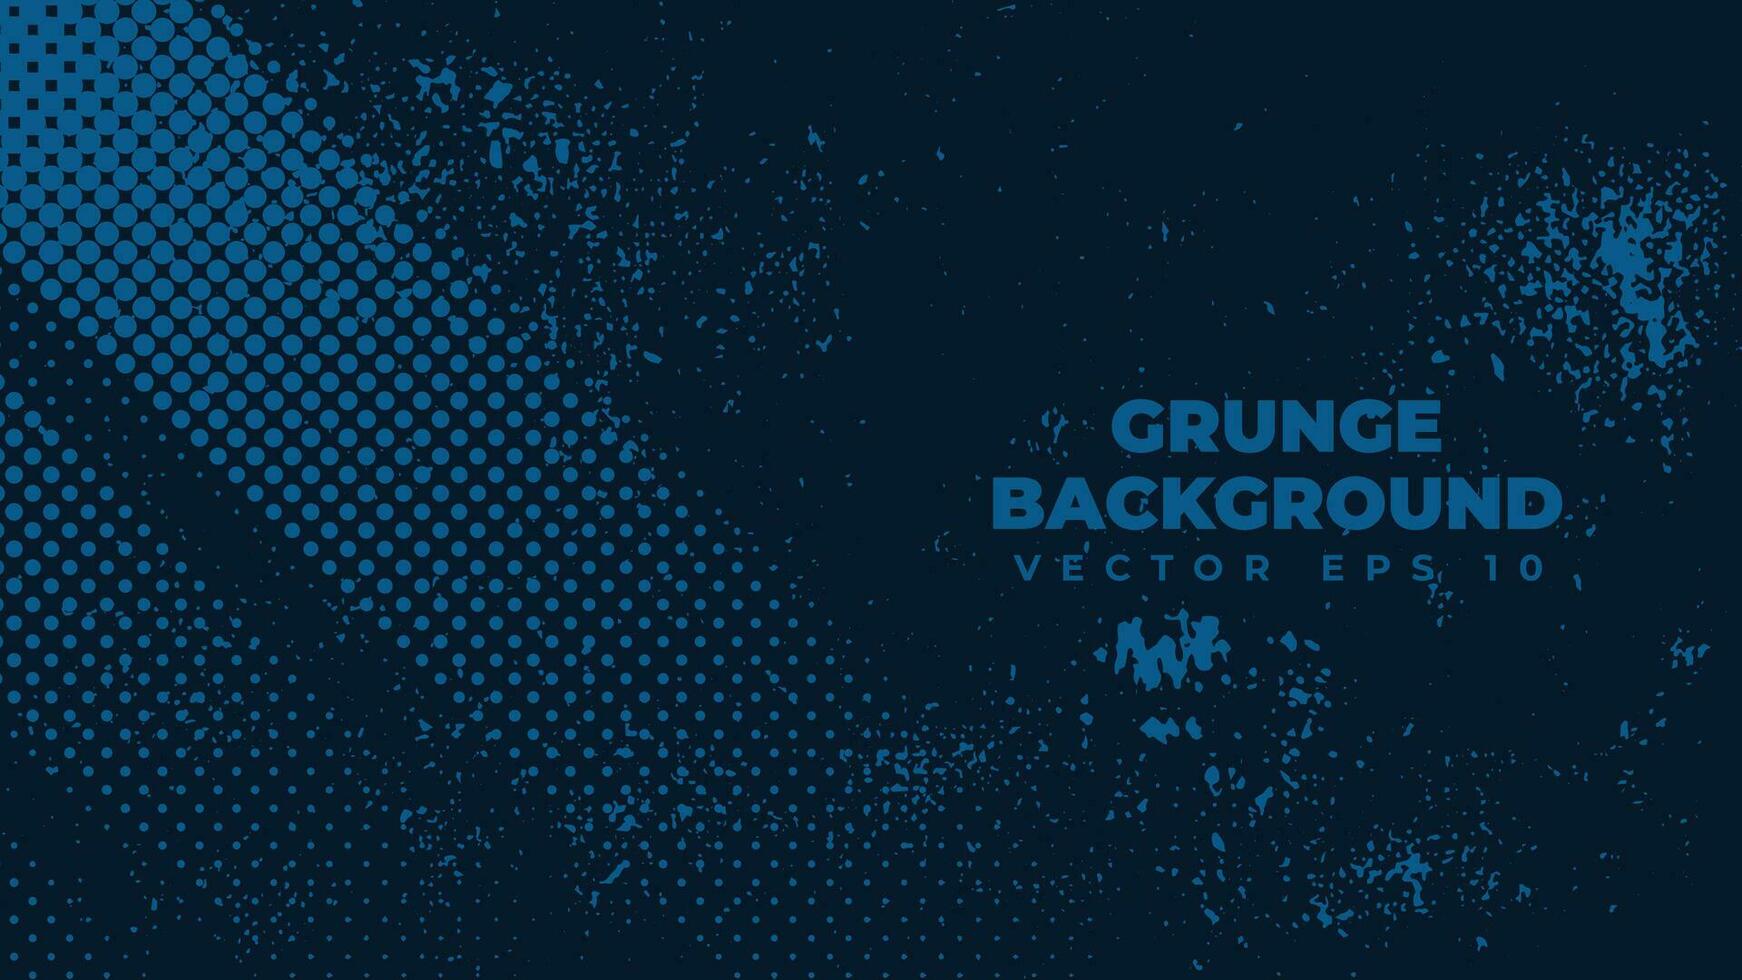 Abstract grunge background vector with paint brush effect, blue banner with copy space area